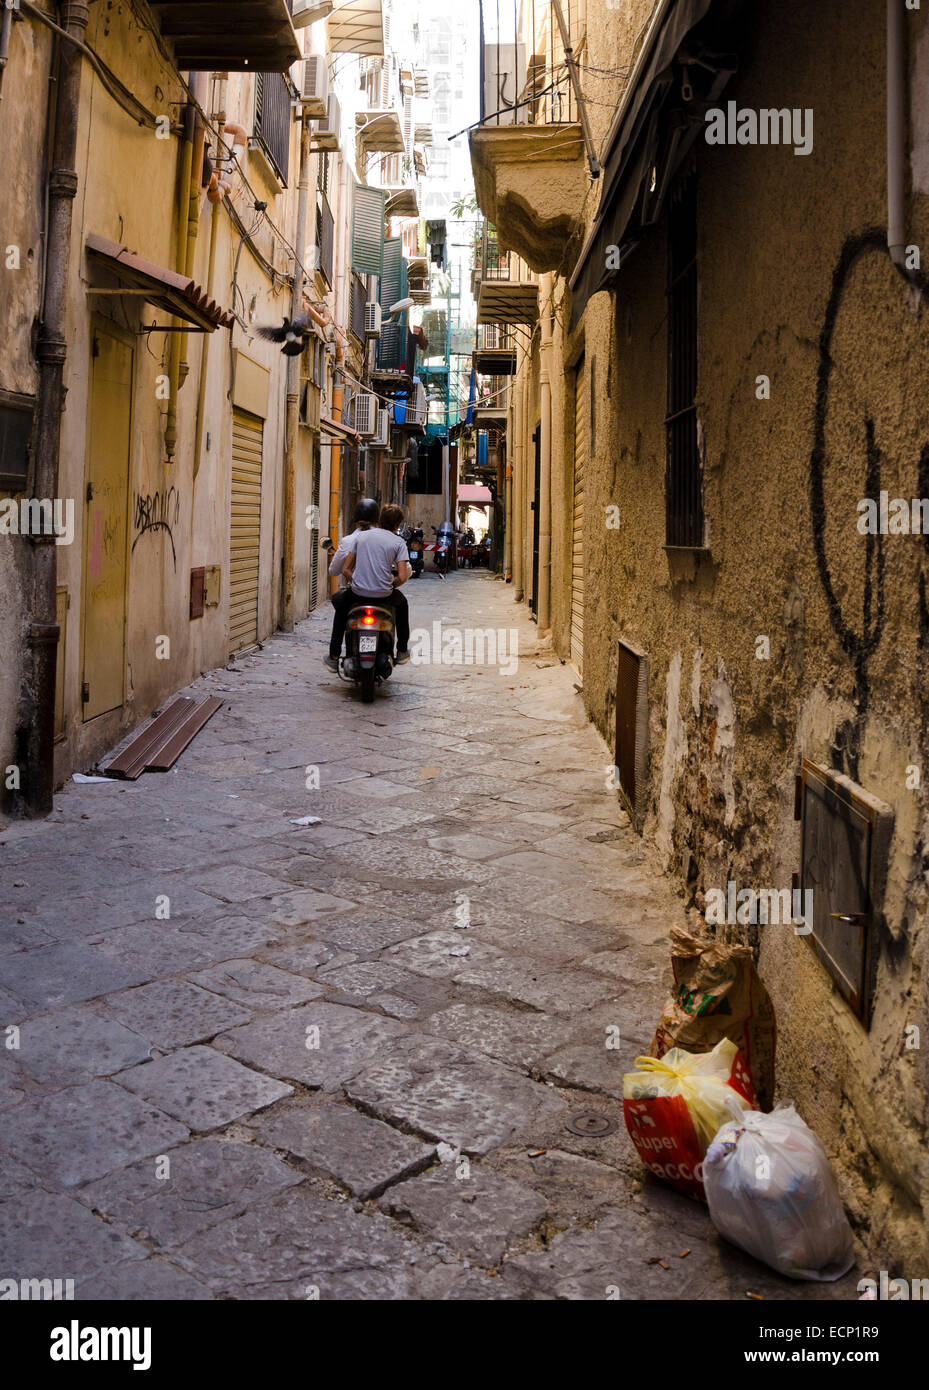 PALERMO, SICILY, ITALY - OCTOBER 3, 2012: Two unidentified men on a moped circulate through a narrow alley in which there are tr Stock Photo